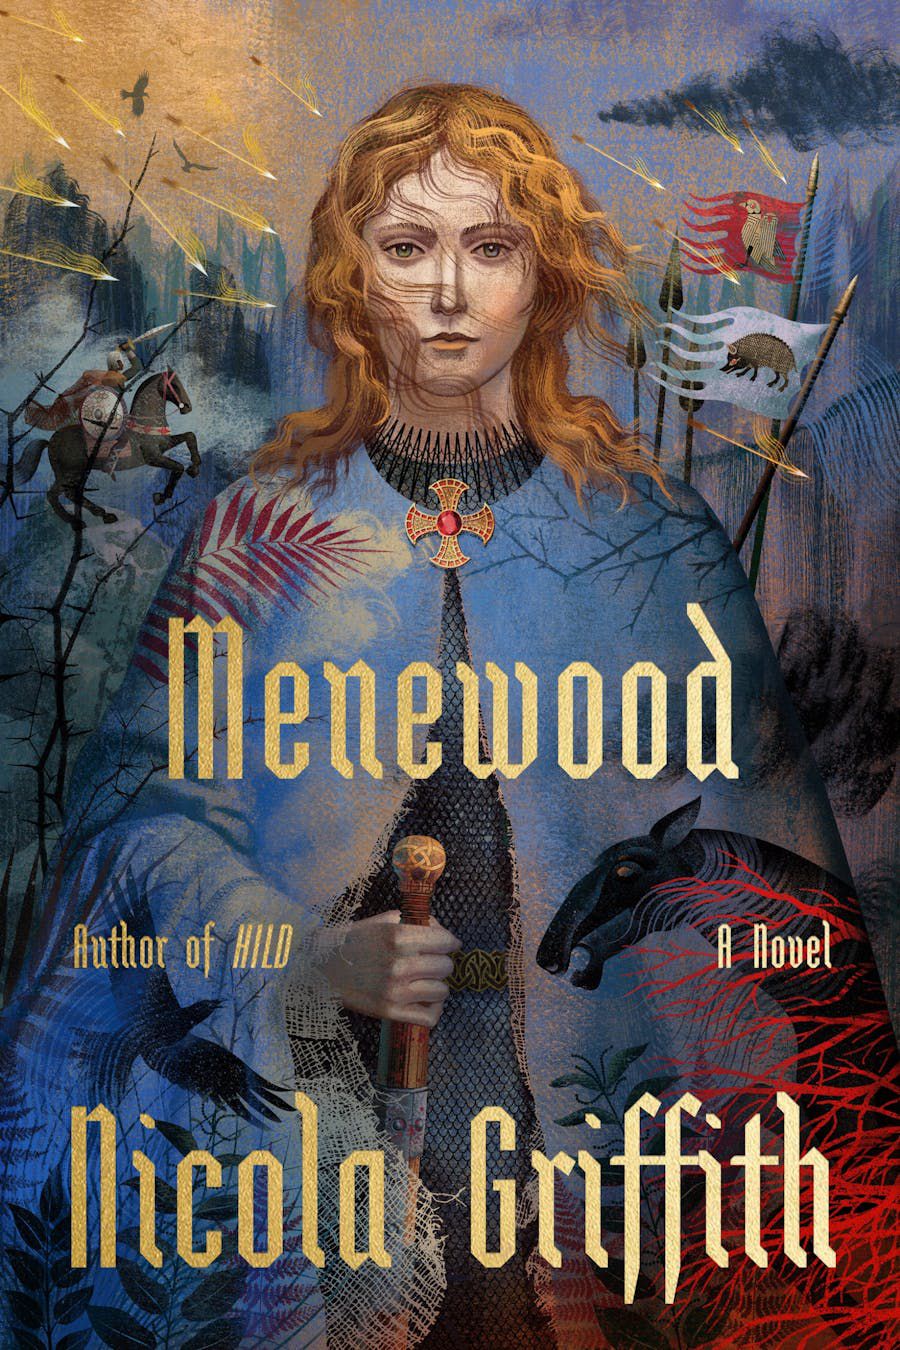 Cover art of Nicola Griffith’s Menewood, a beautifully painted image featuring a woman holding a sword and wearing a knight’s outfit as war rages on around her.